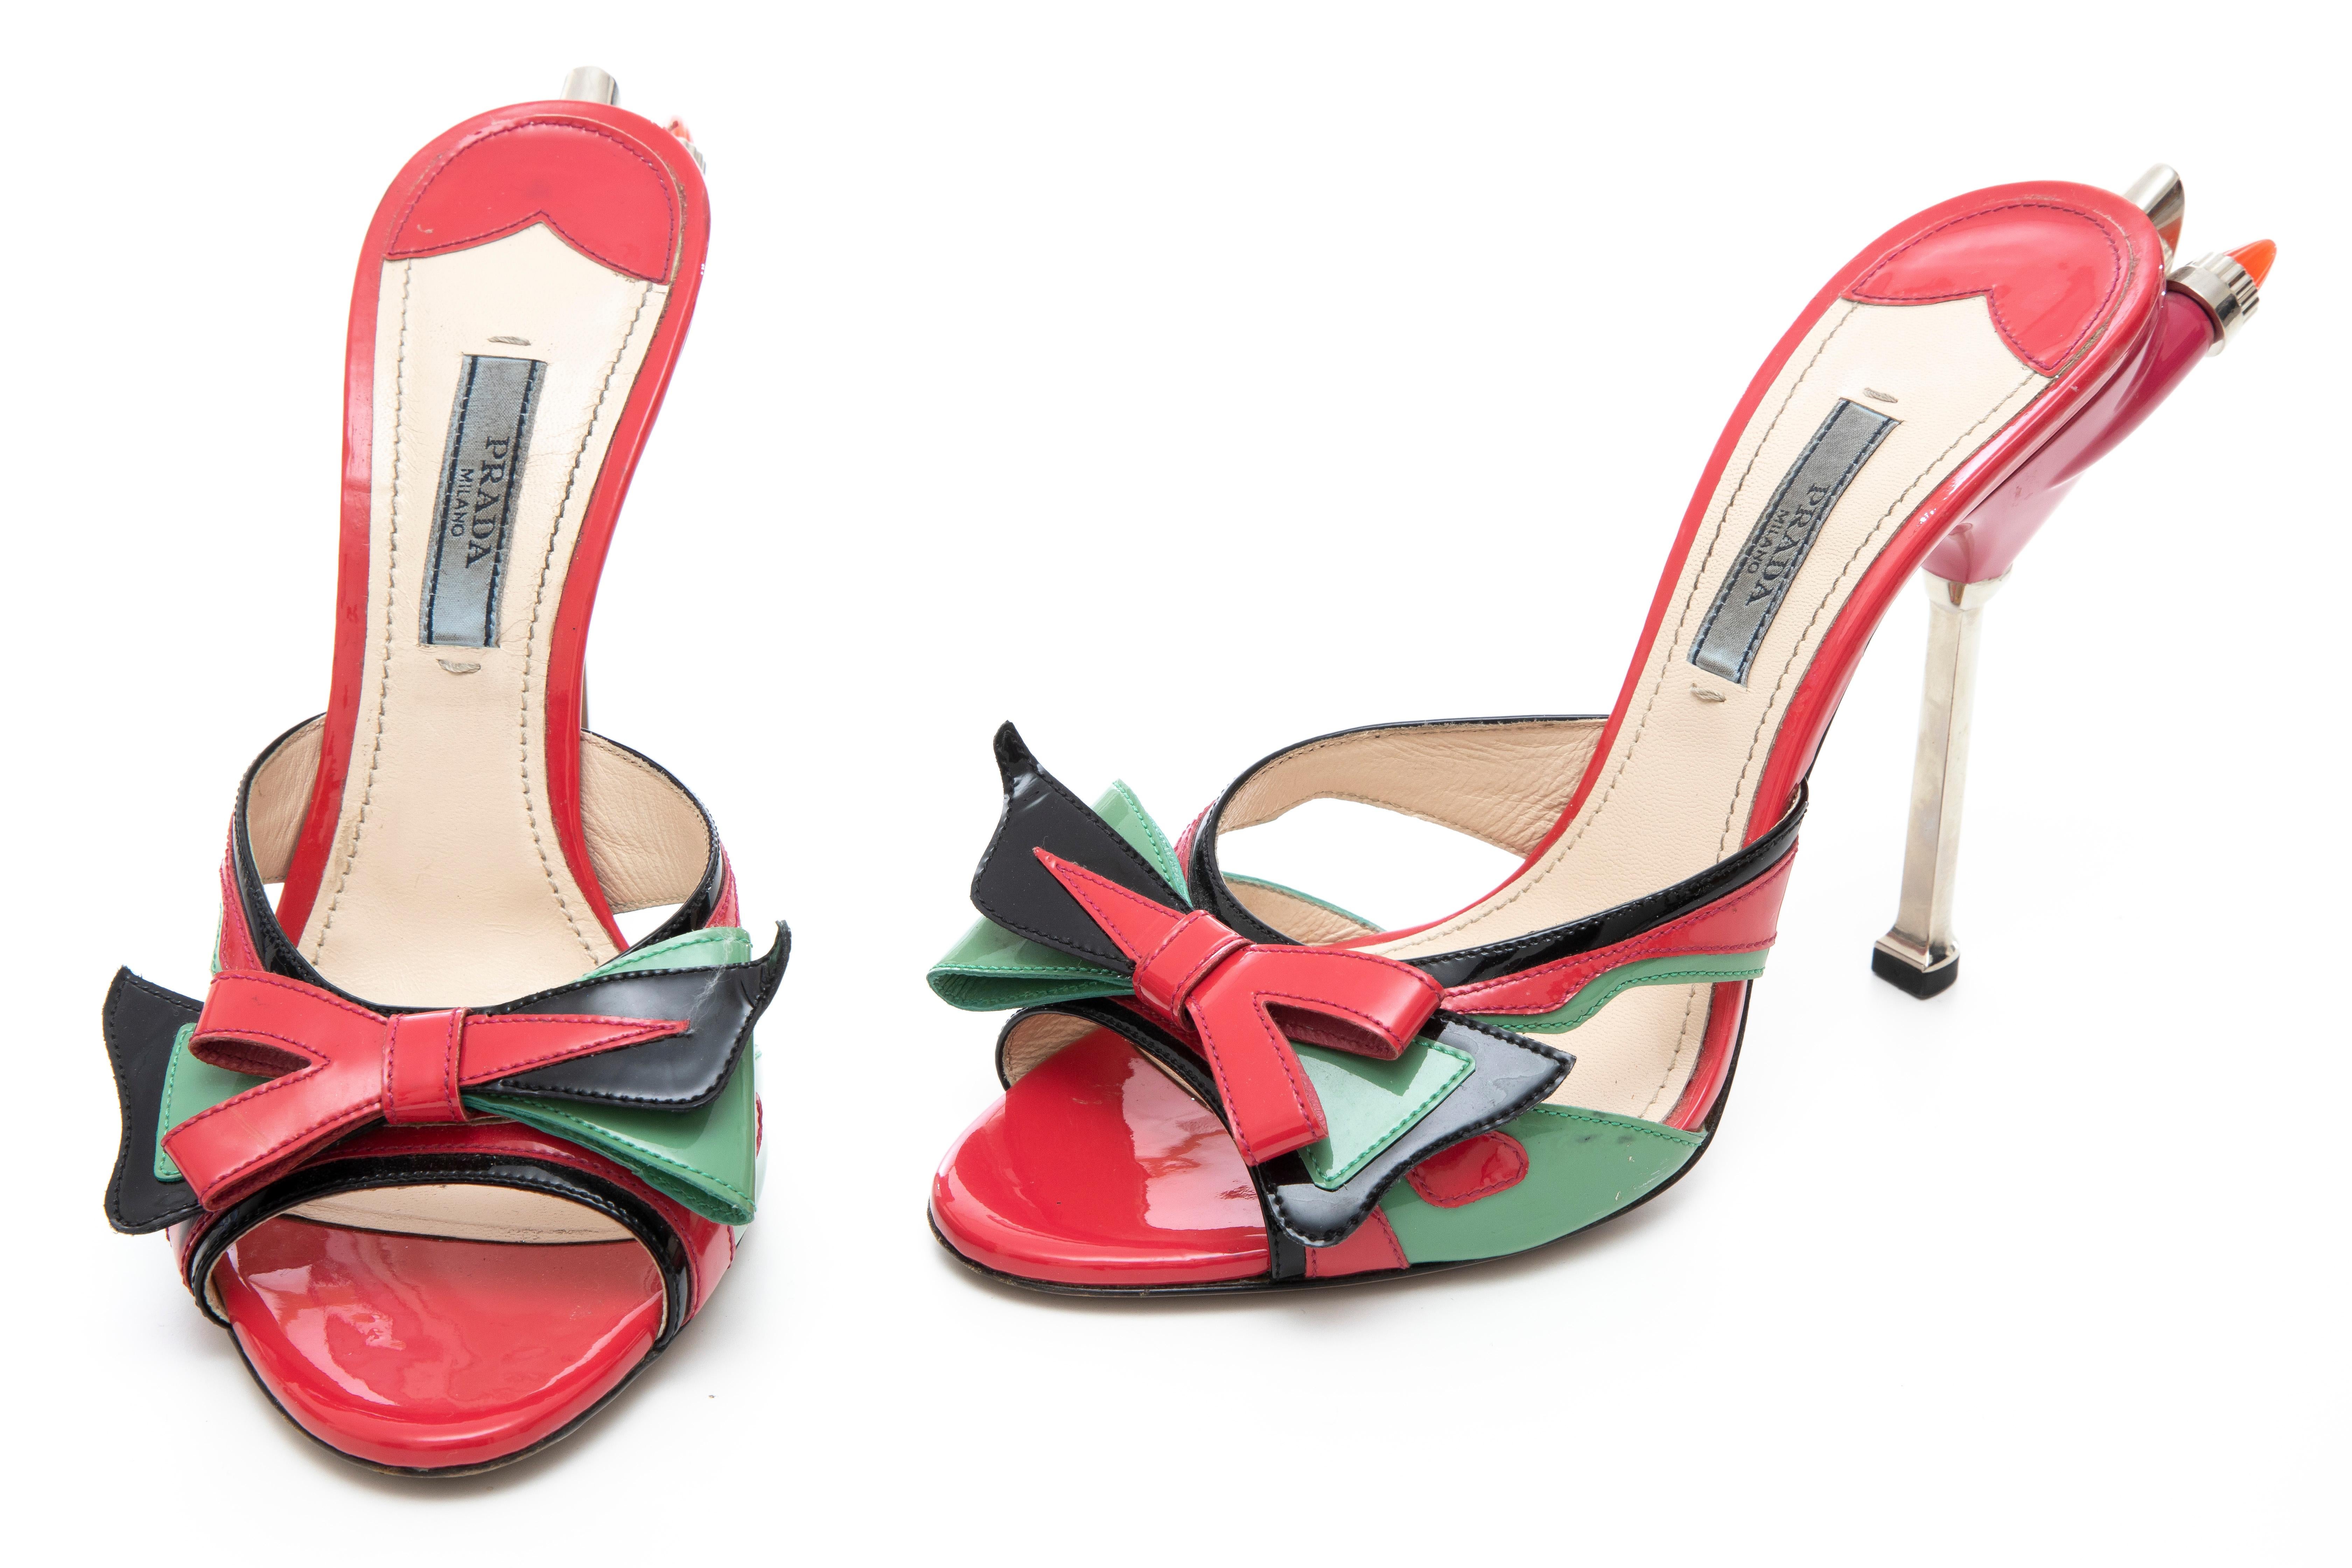 Prada Runway Patent Leather Tail Light Sandal, Spring 2012 For Sale 11